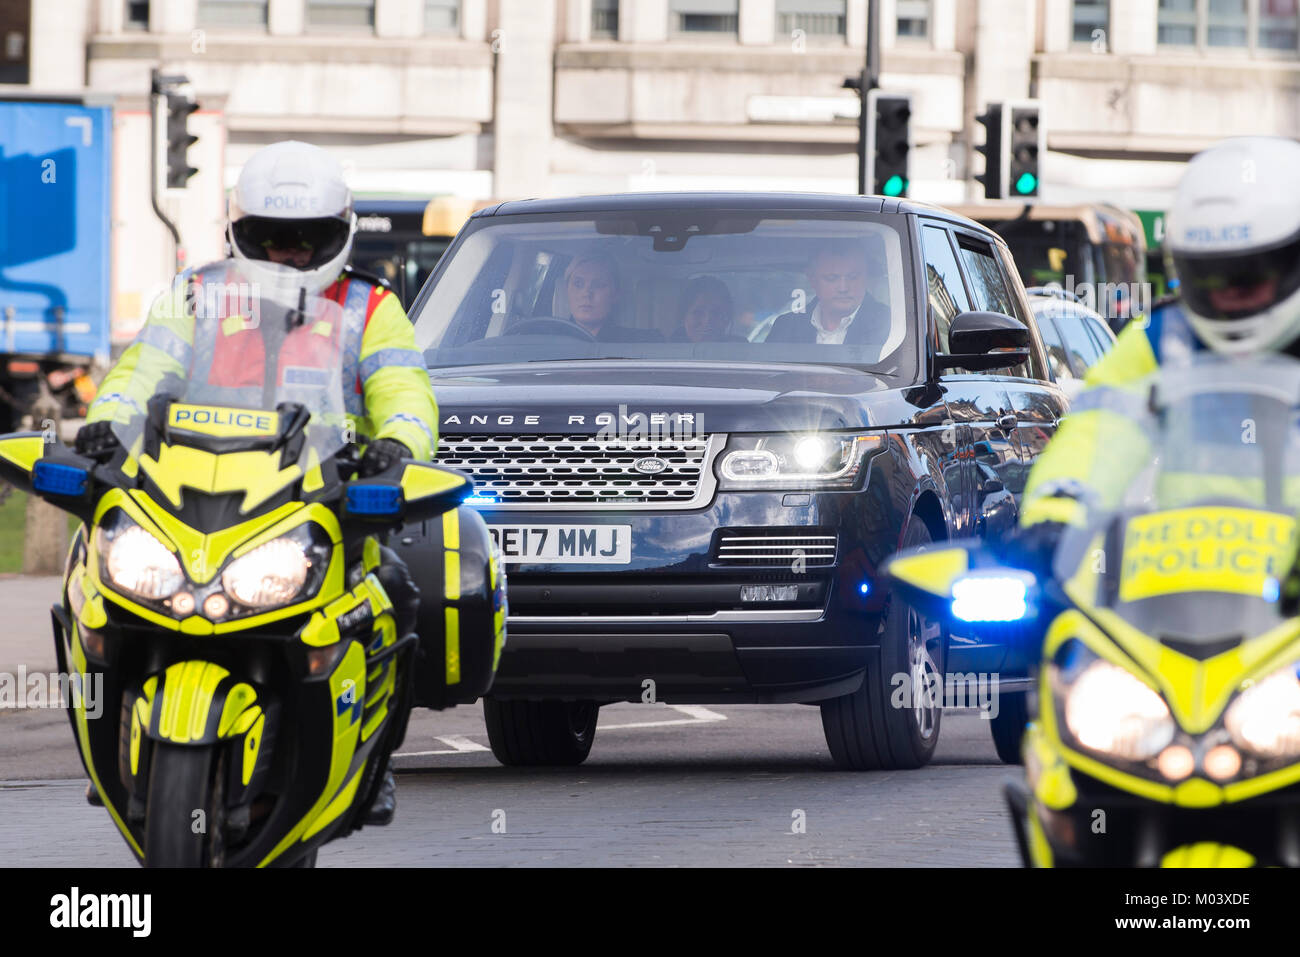 Cardiff Castle, Cardiff, UK. 18th Jan, 2018. Prince Henry of Wales Familiarly known as Prince Harry 33 and his American fiancee Meghan Markle 36 Actress drive into Cardiff castle ahead of their visit. This is their first time visiting Wales as a couple before their wedding in May. Credit: Rhys Skinner/Alamy Live News Stock Photo